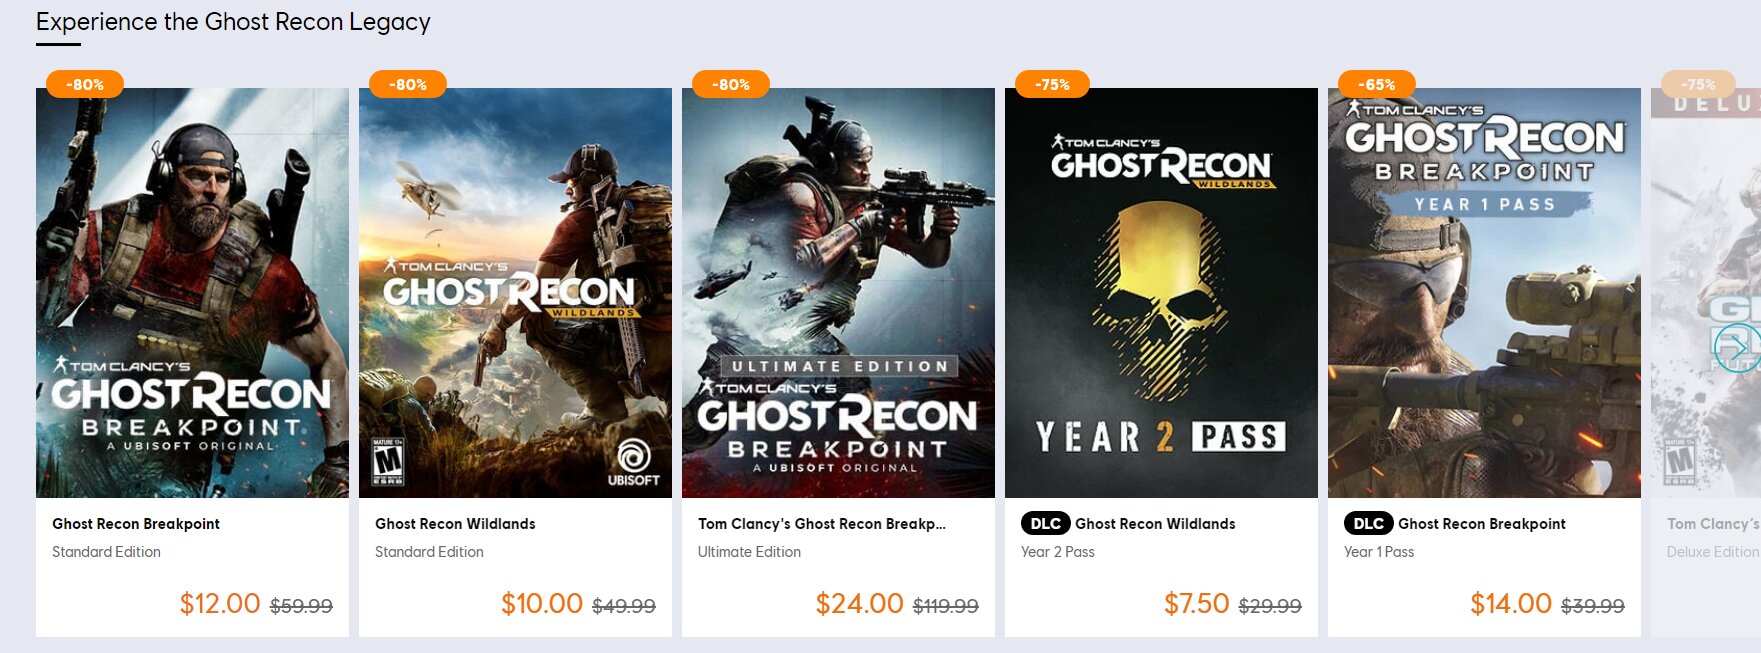 Ghost Recon titles are on sale.